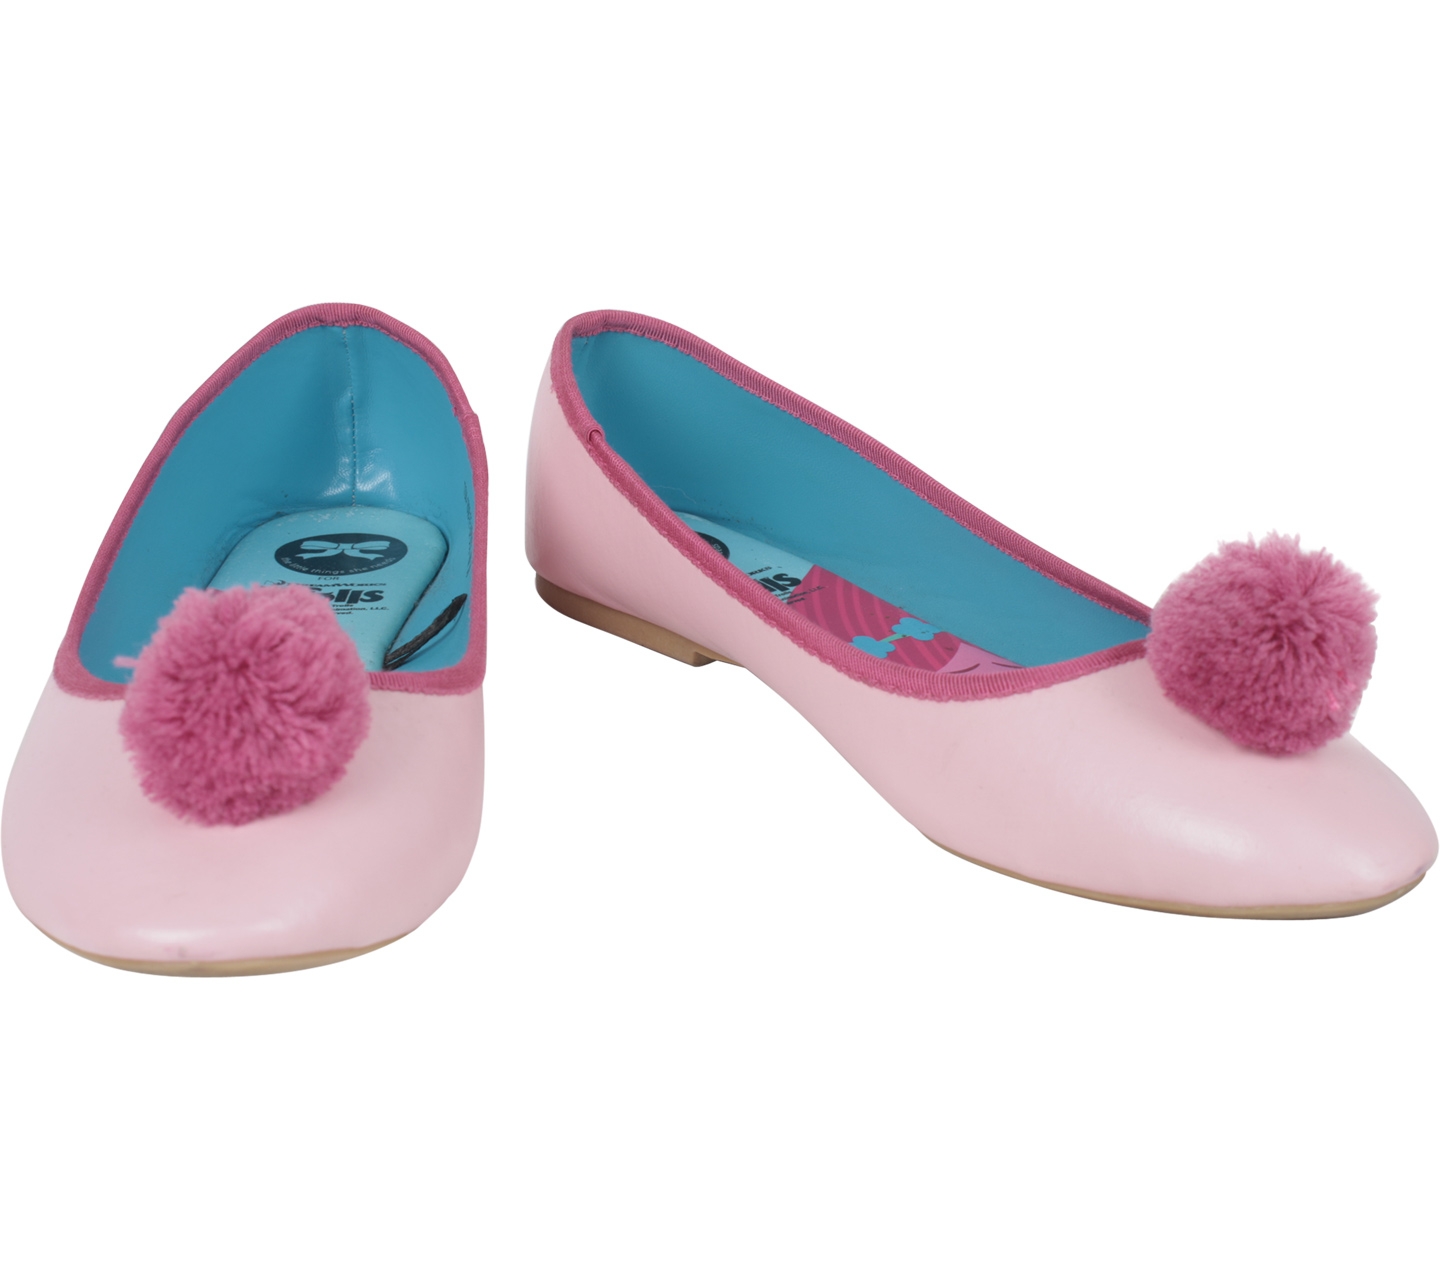 The Little Things She Needs Pink Pom-Pom Flats